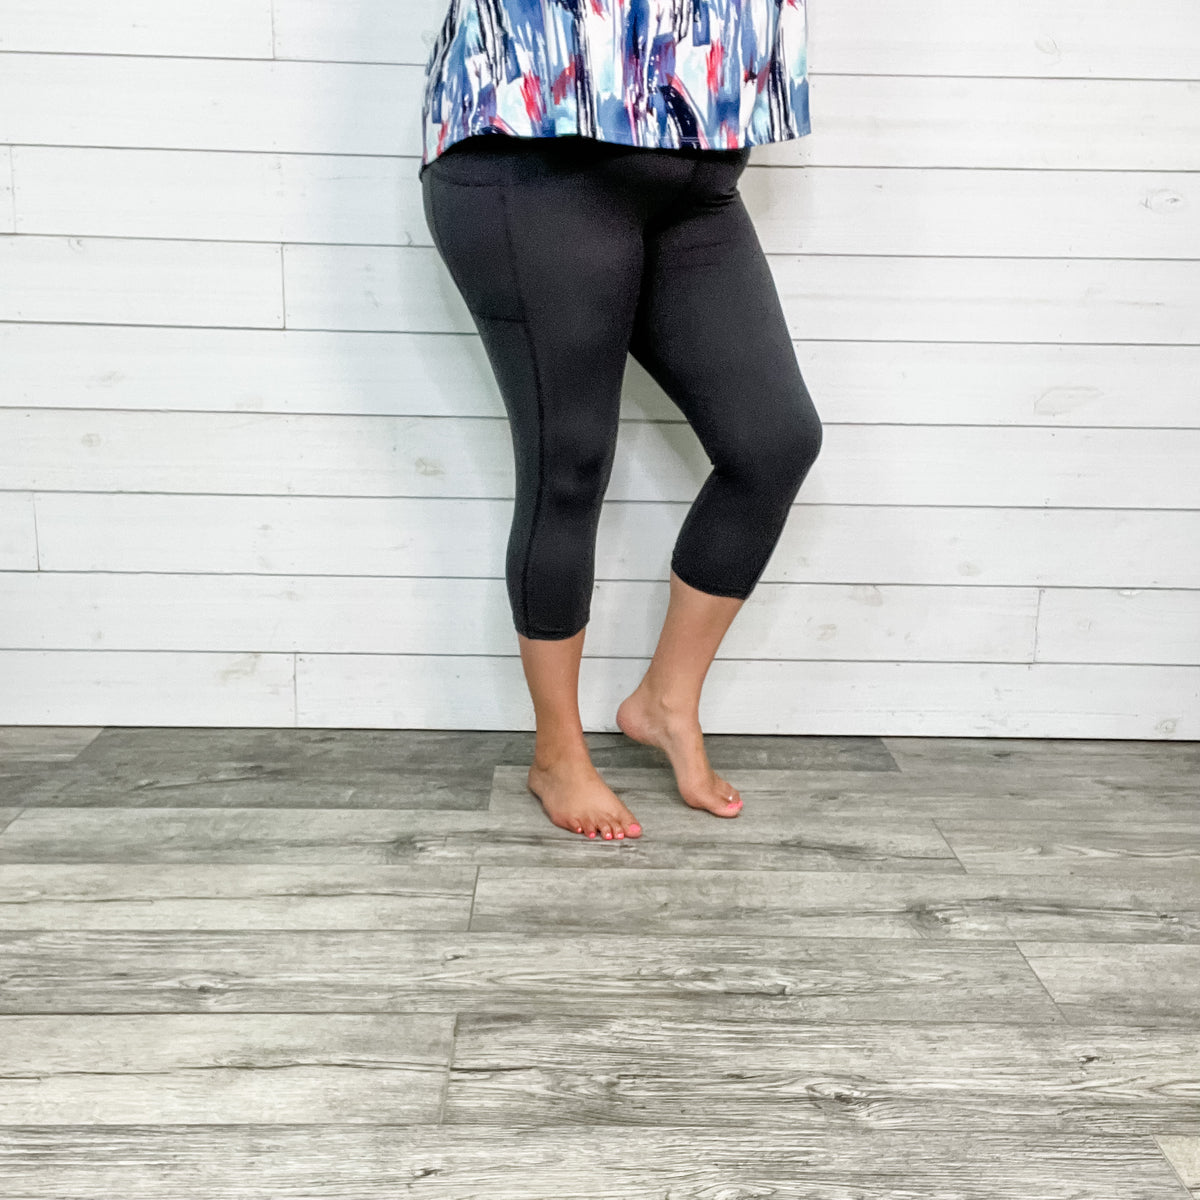 Classic Black Legging Style Capris With Pockets